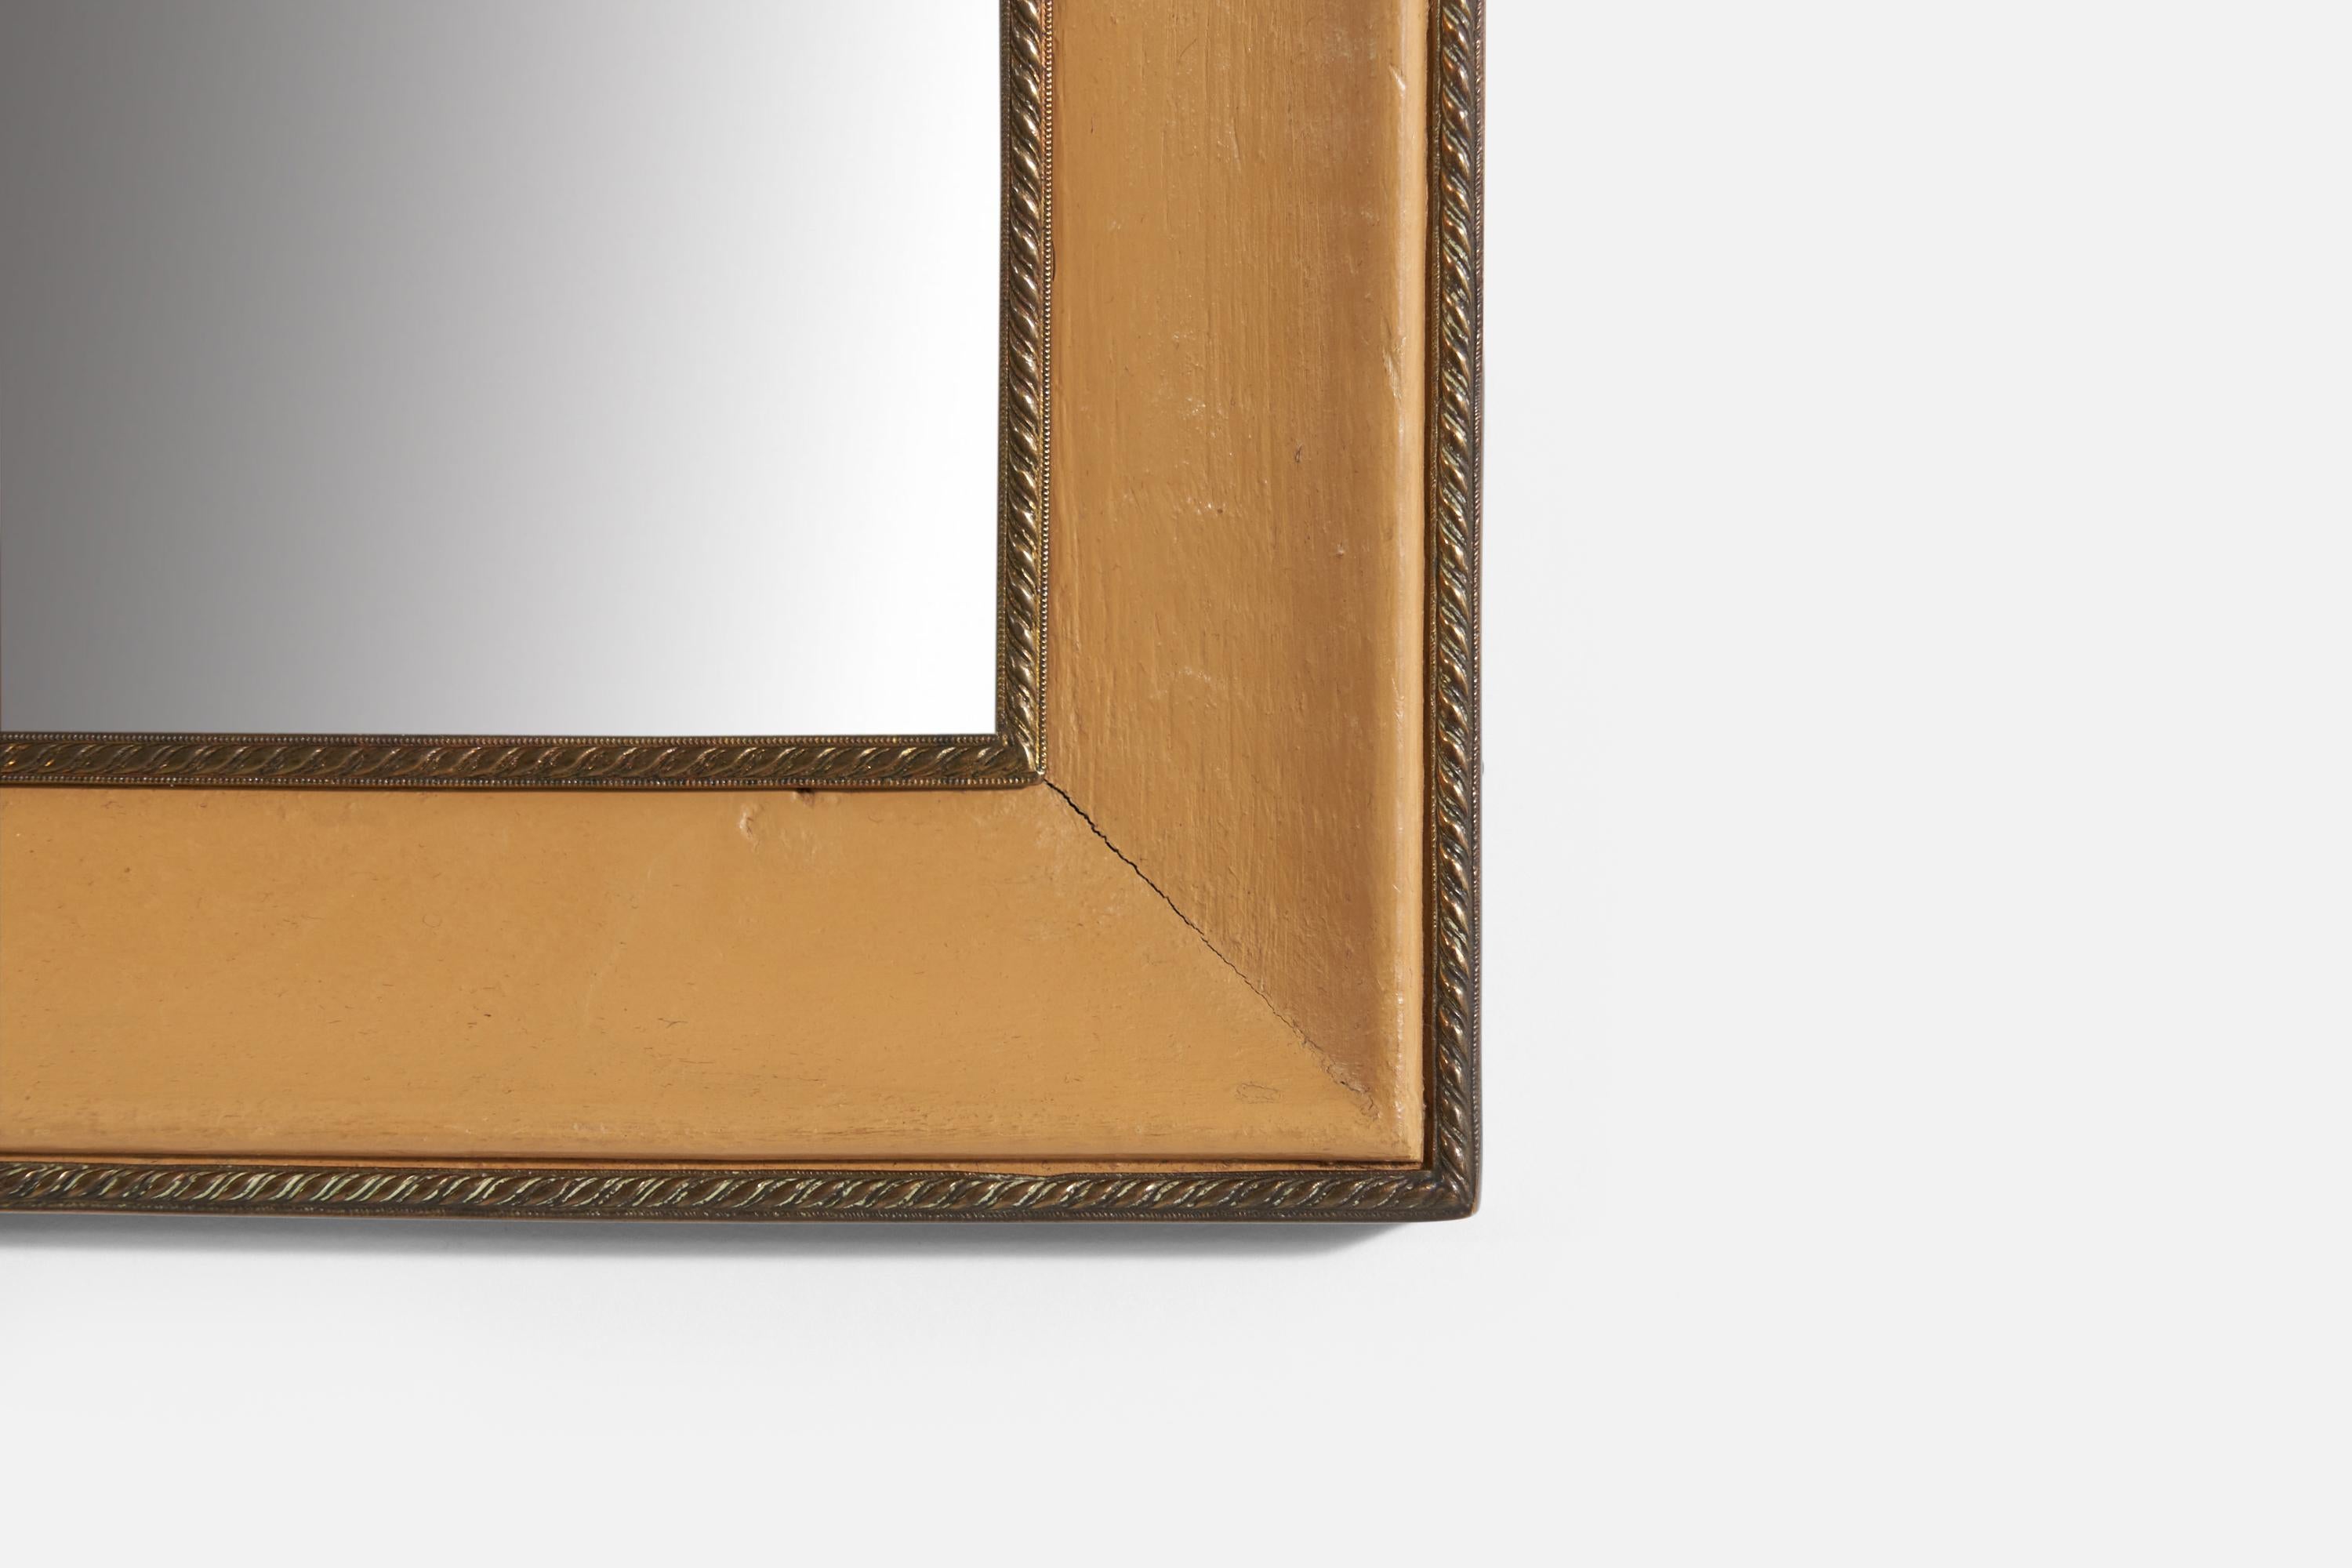 Italian Designer, Pair of Wall Mirrors, Leather, Brass, Mirror, Italy, 1940s For Sale 1